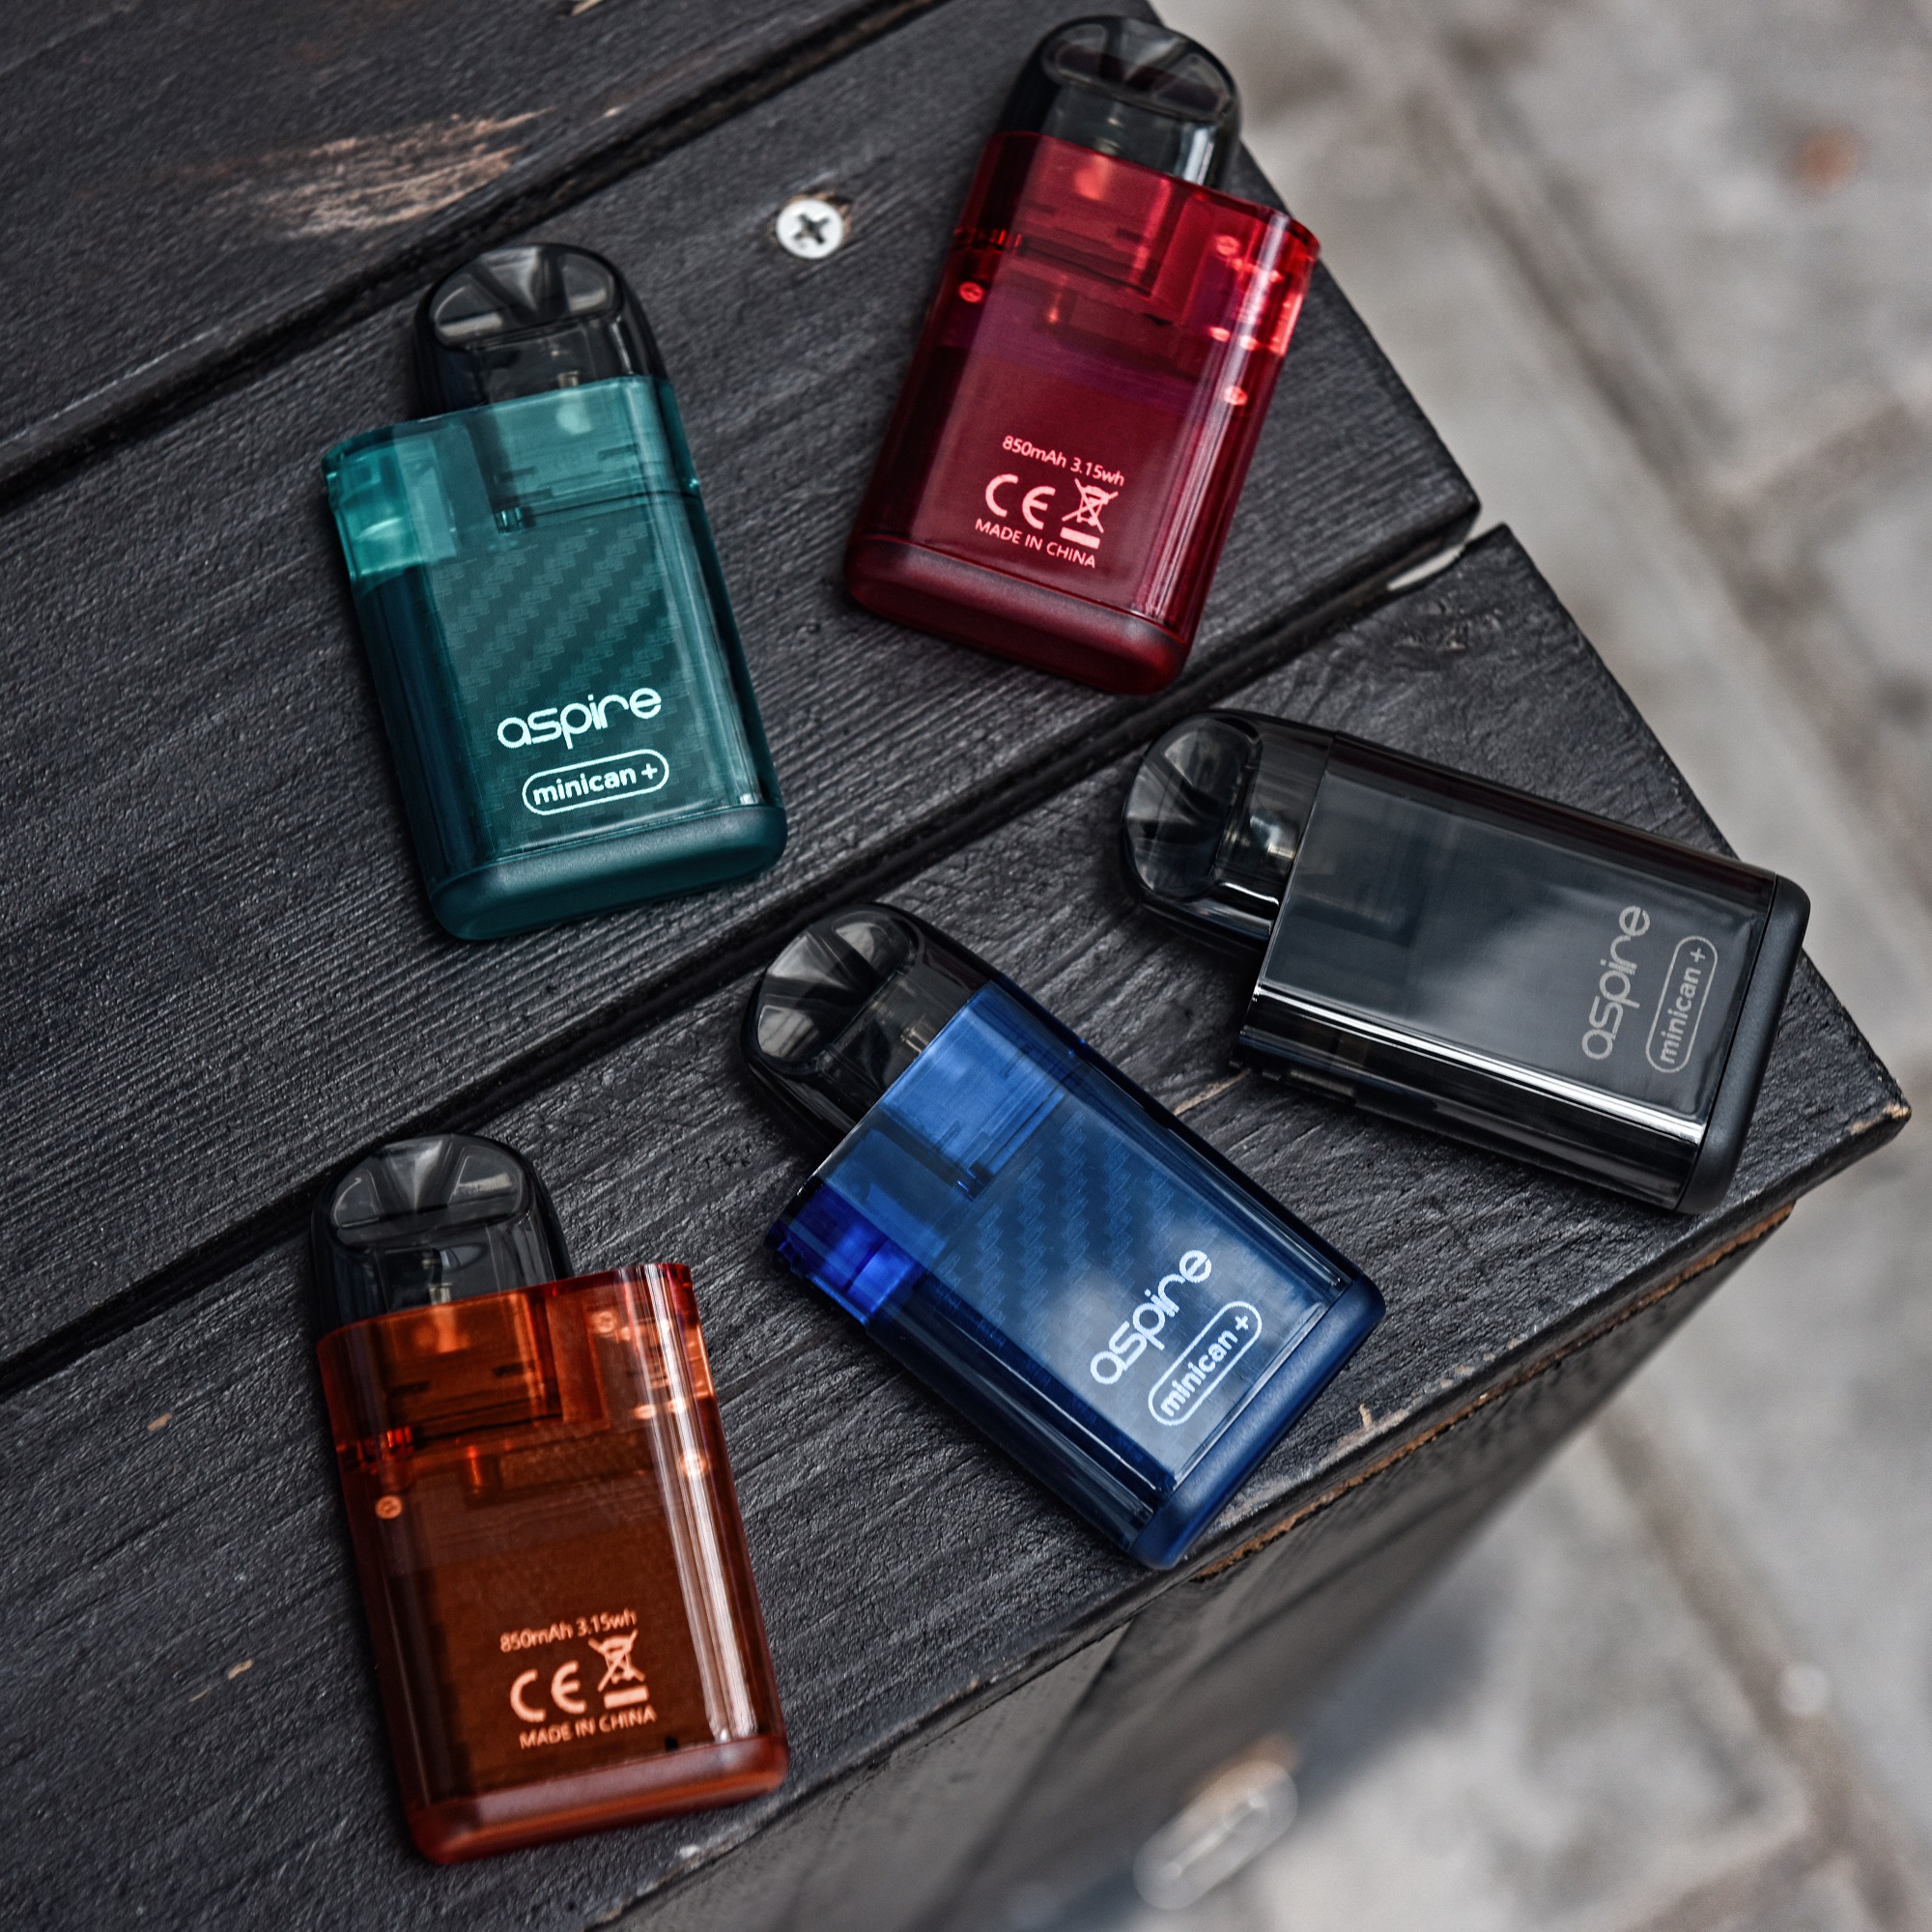 Aspire Minican+ in semitransparent orange, green, blue, red and black.